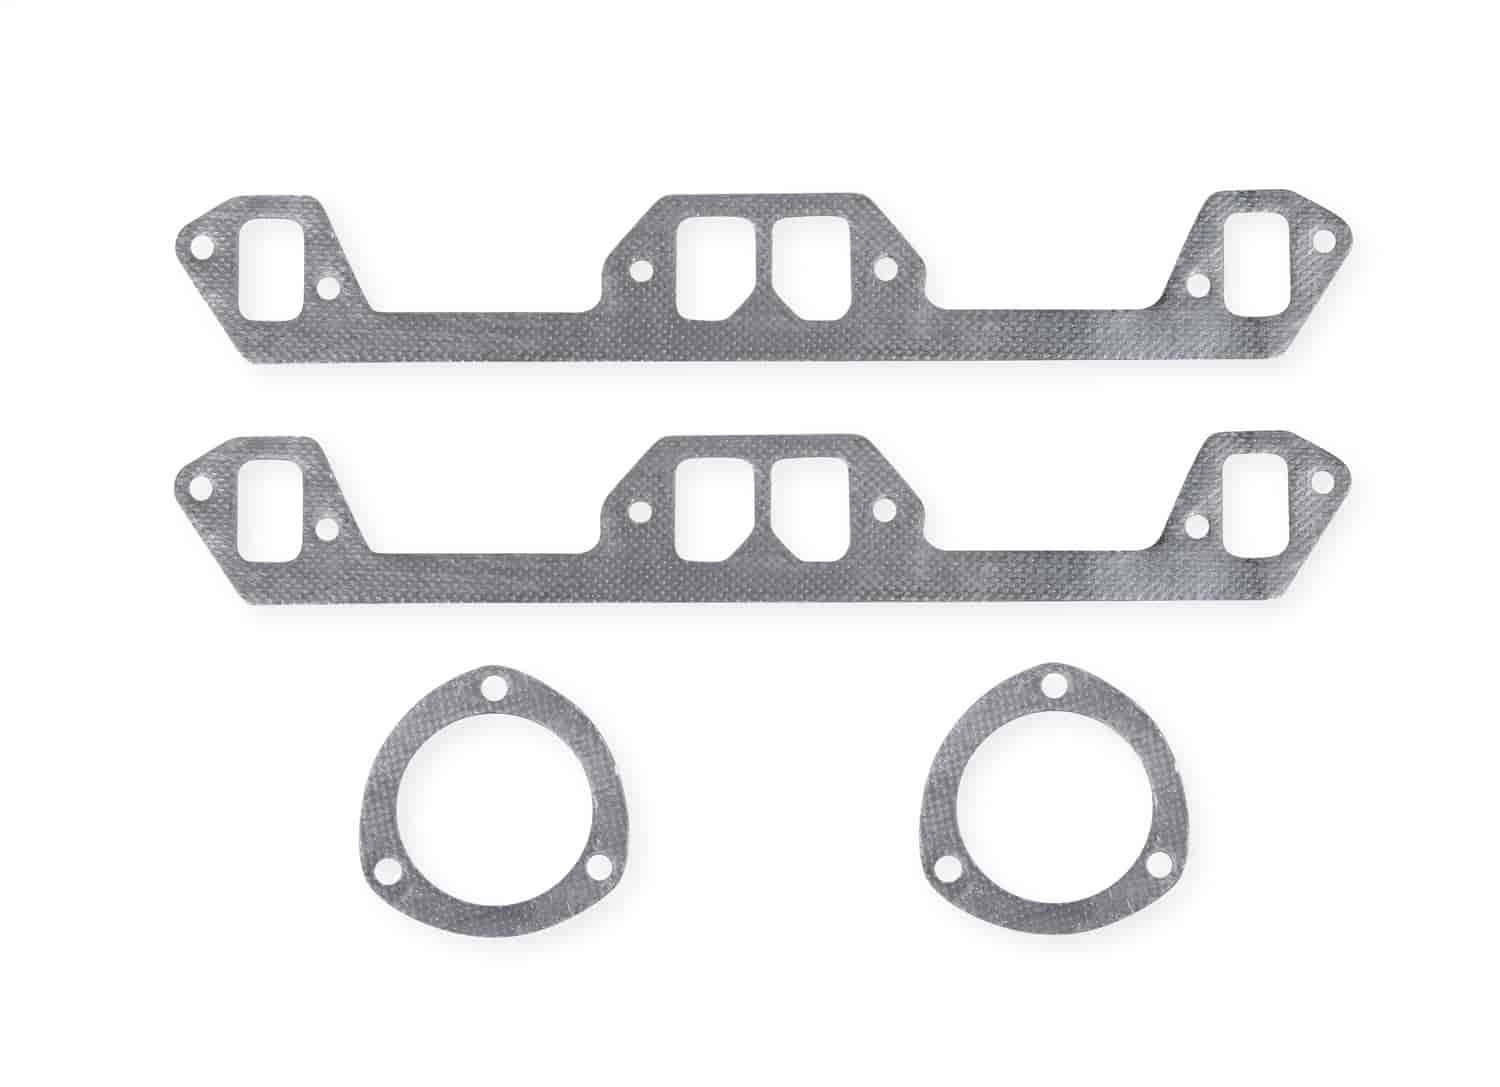 Header Replacement Gasket Set Small Block Chrysler Includes